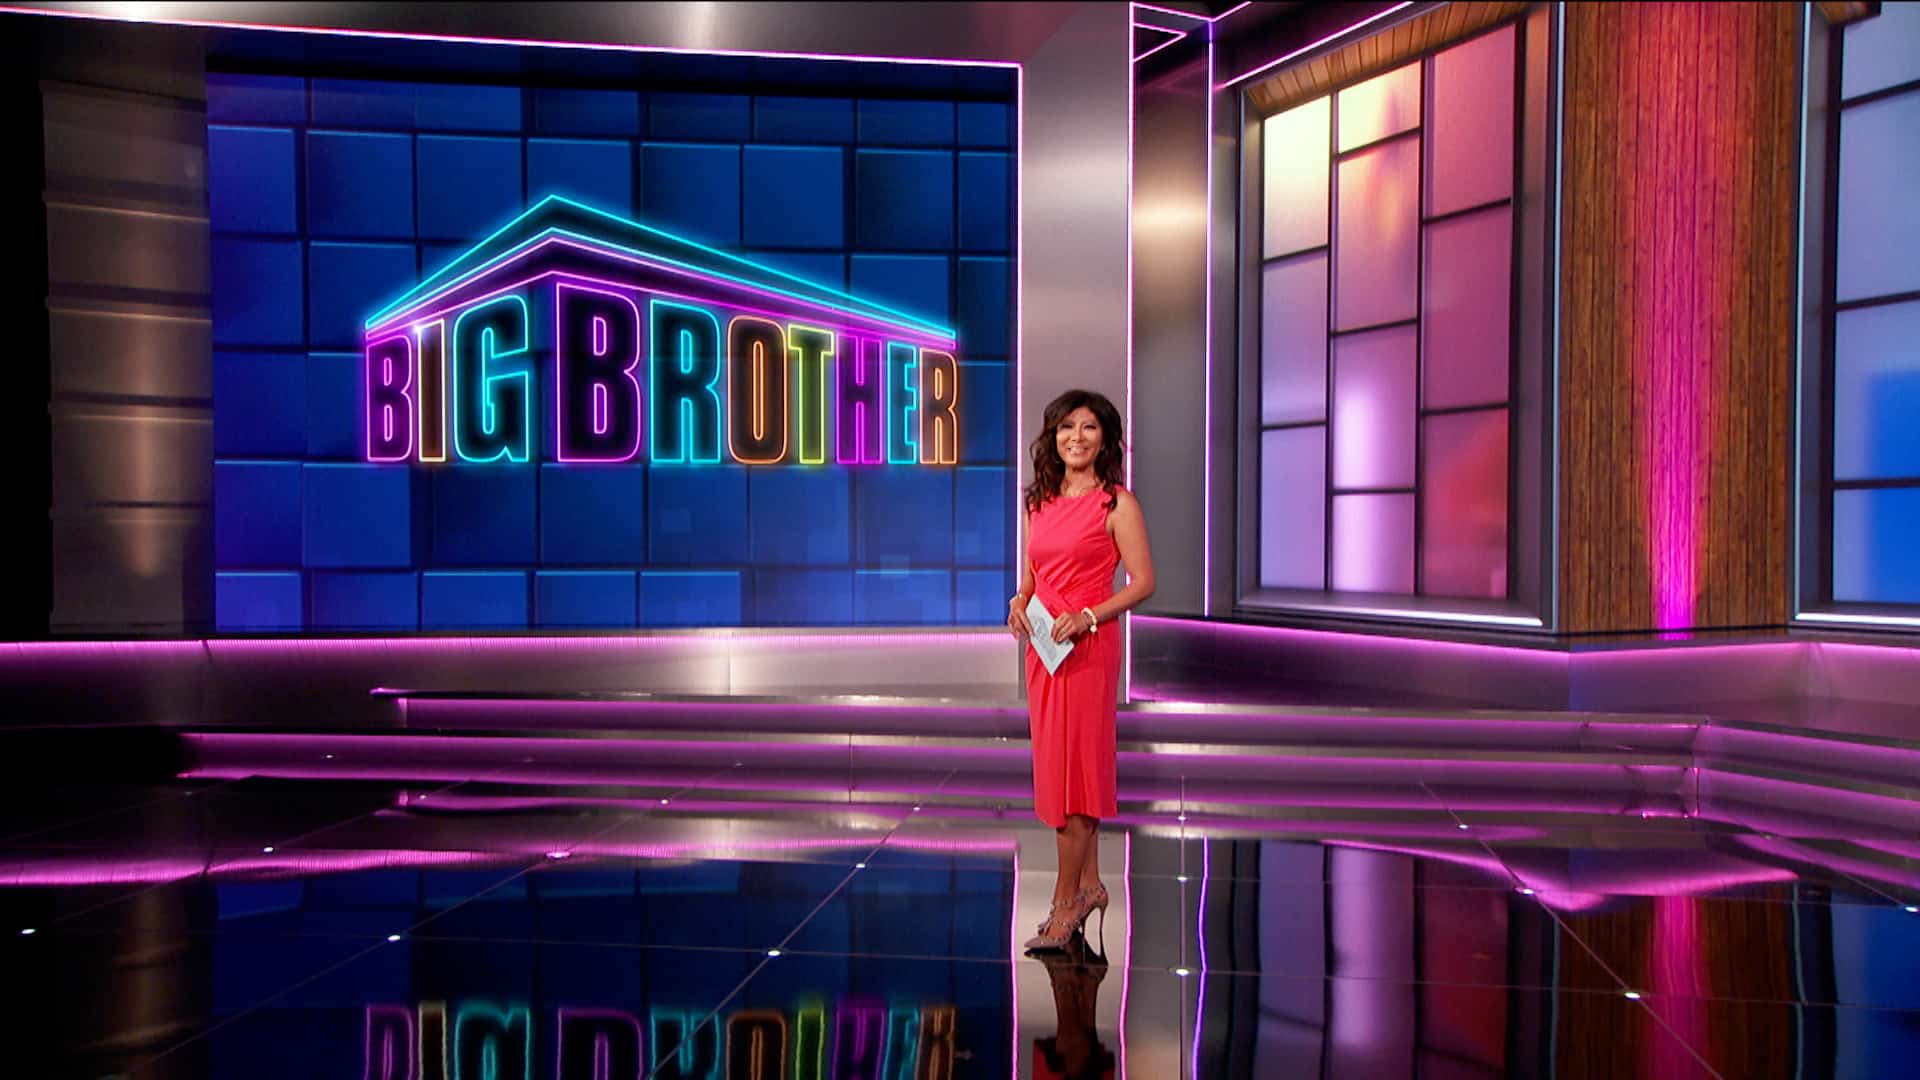 ‘Big Brother’: The Show That Just Keeps Going